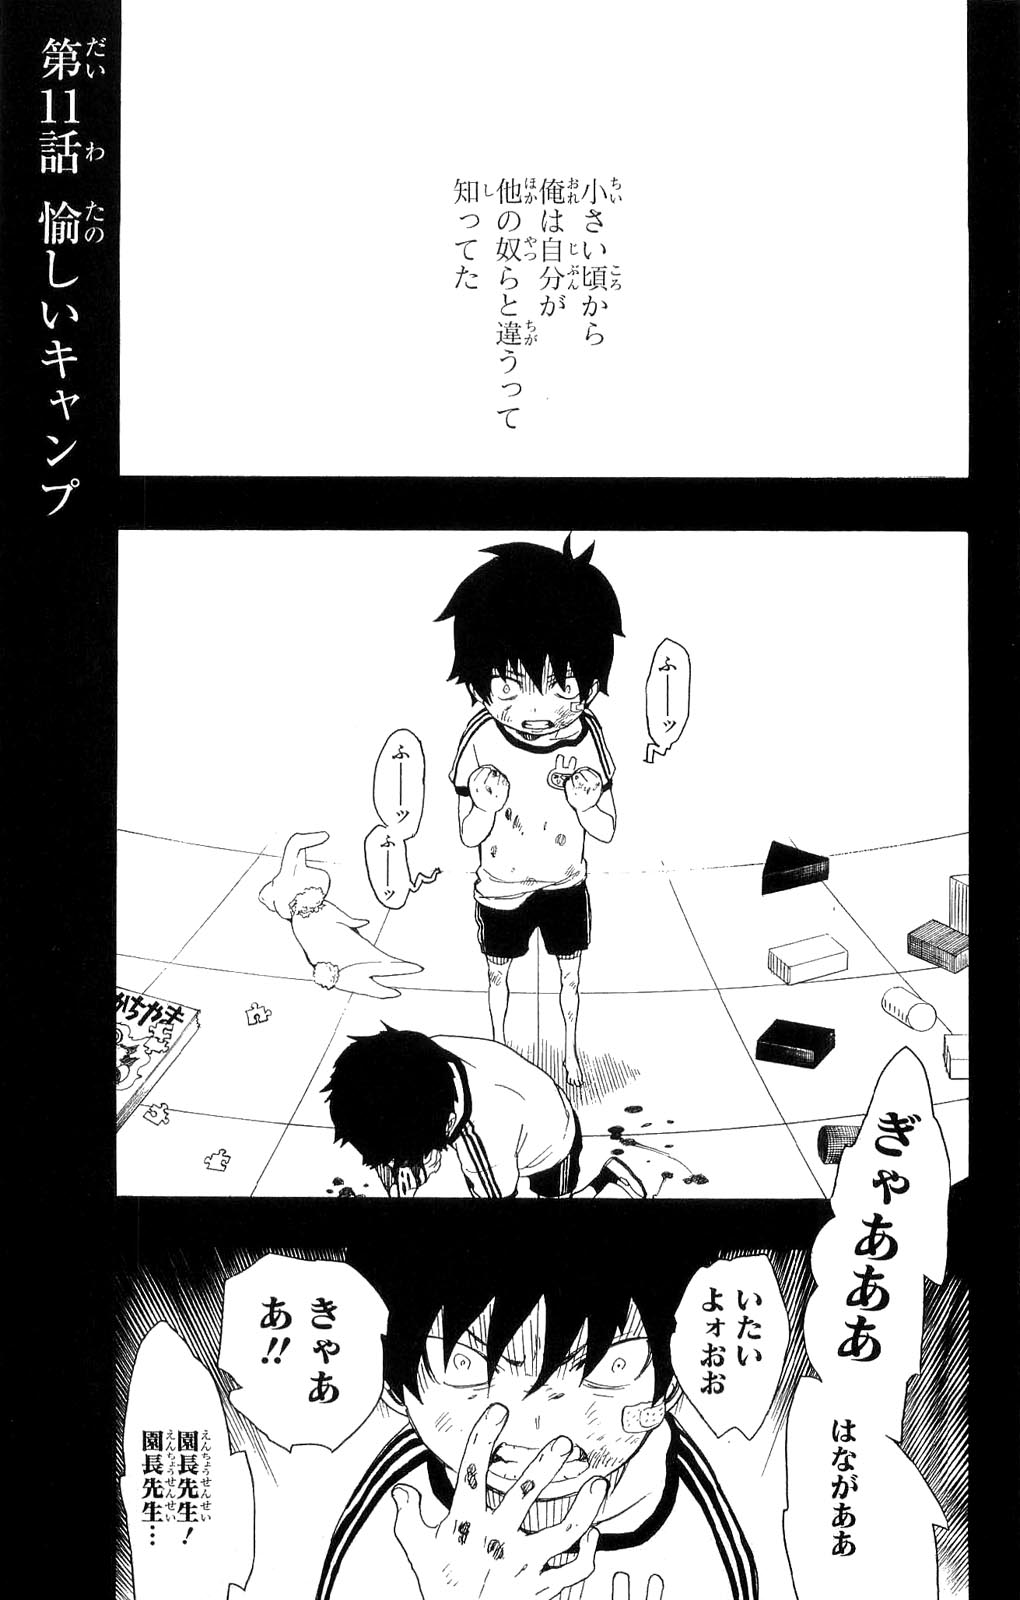 Ao no Exorcist - Chapter 11 - Page 1